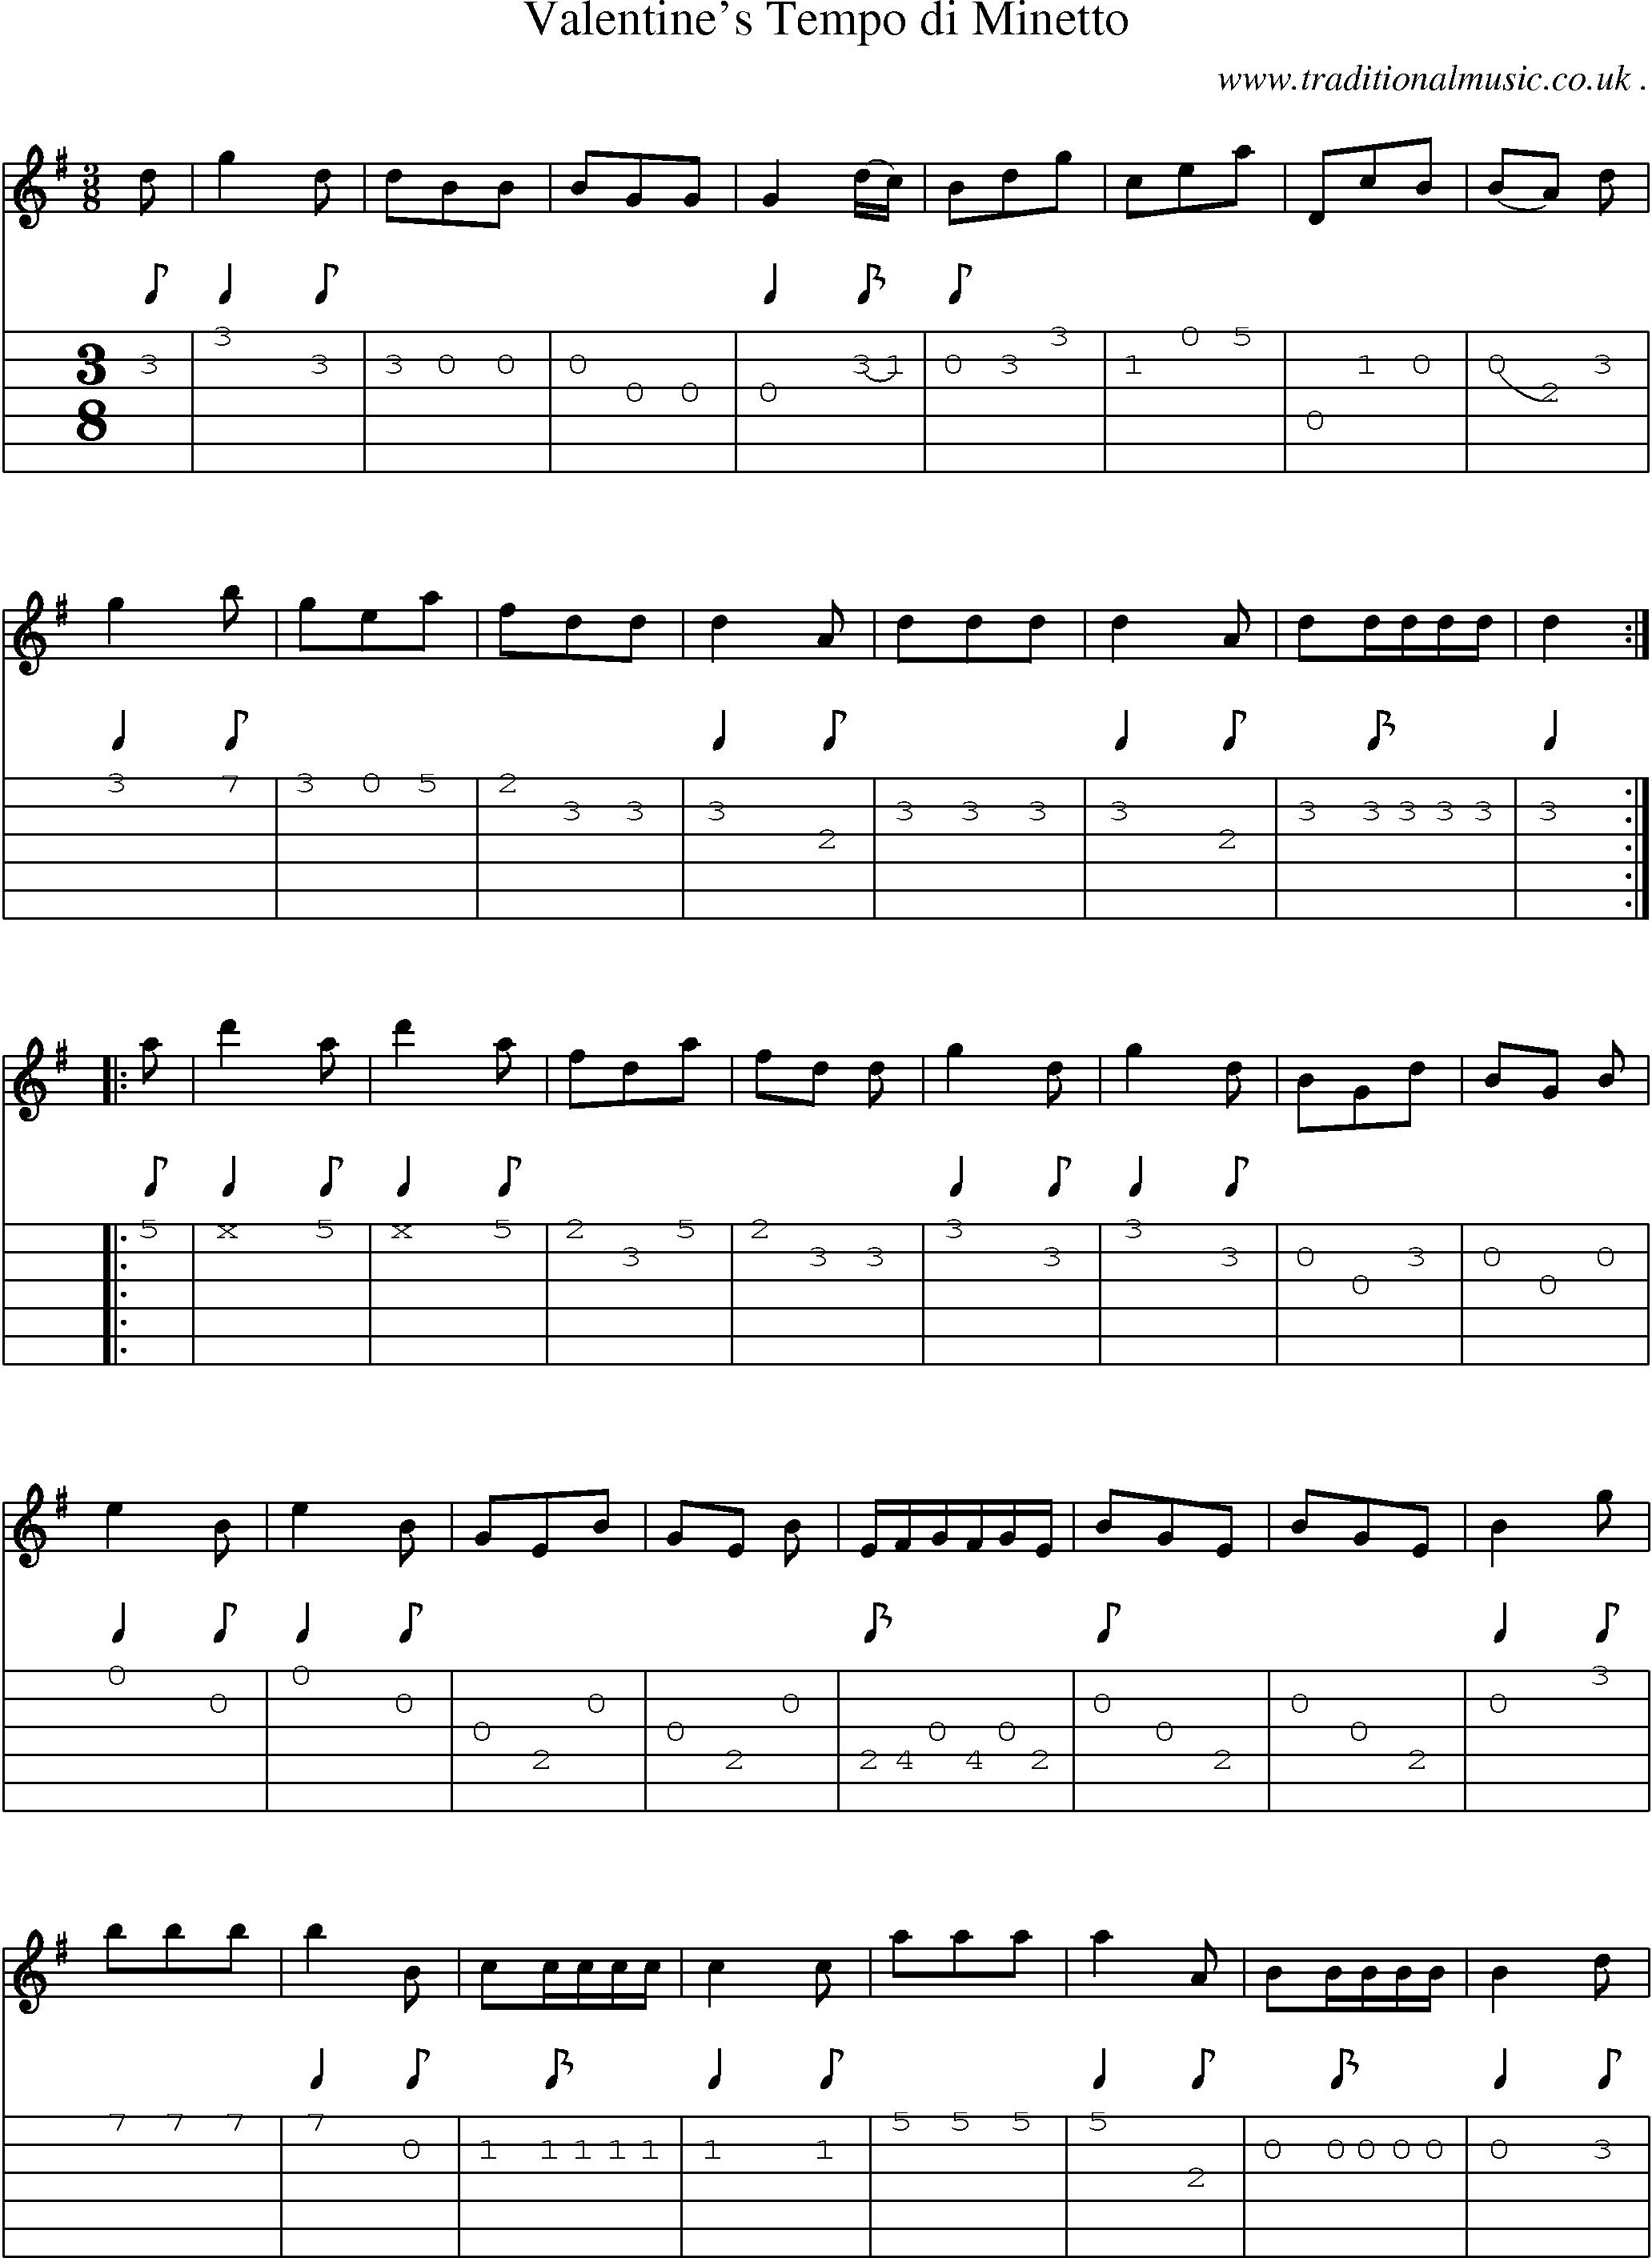 Sheet-Music and Guitar Tabs for Valentines Tempo Di Minetto